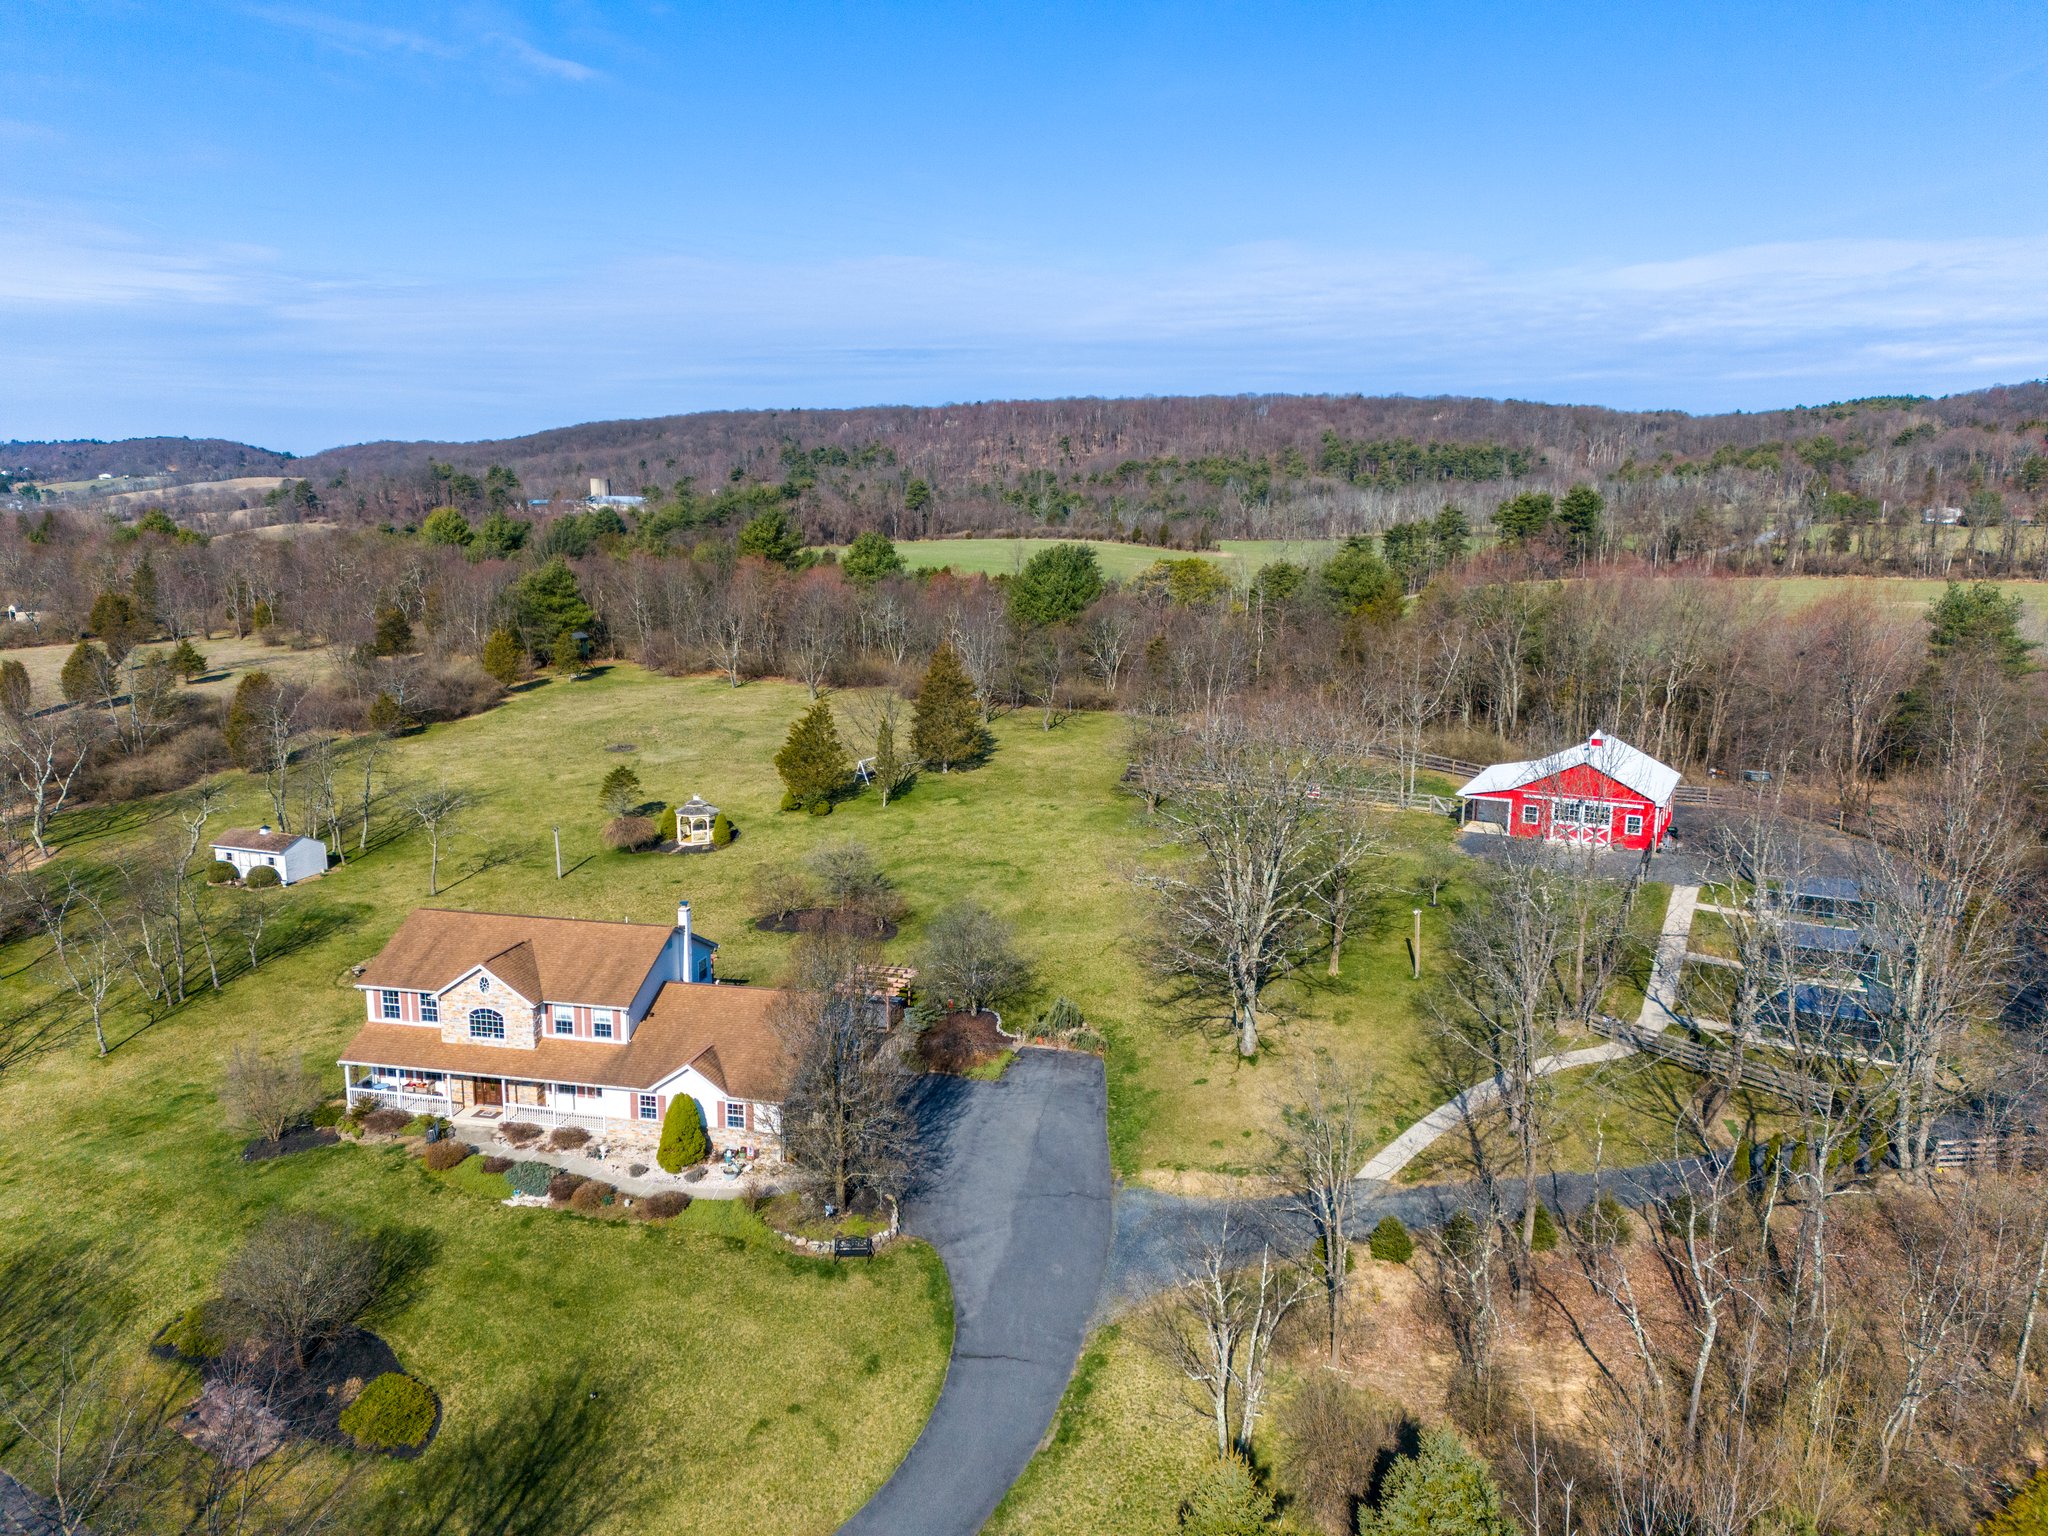 Aerial Photo of a farm for sale in the poconos, featuring a large colonial home with covered front porch and a horse barn and pasture in the back.